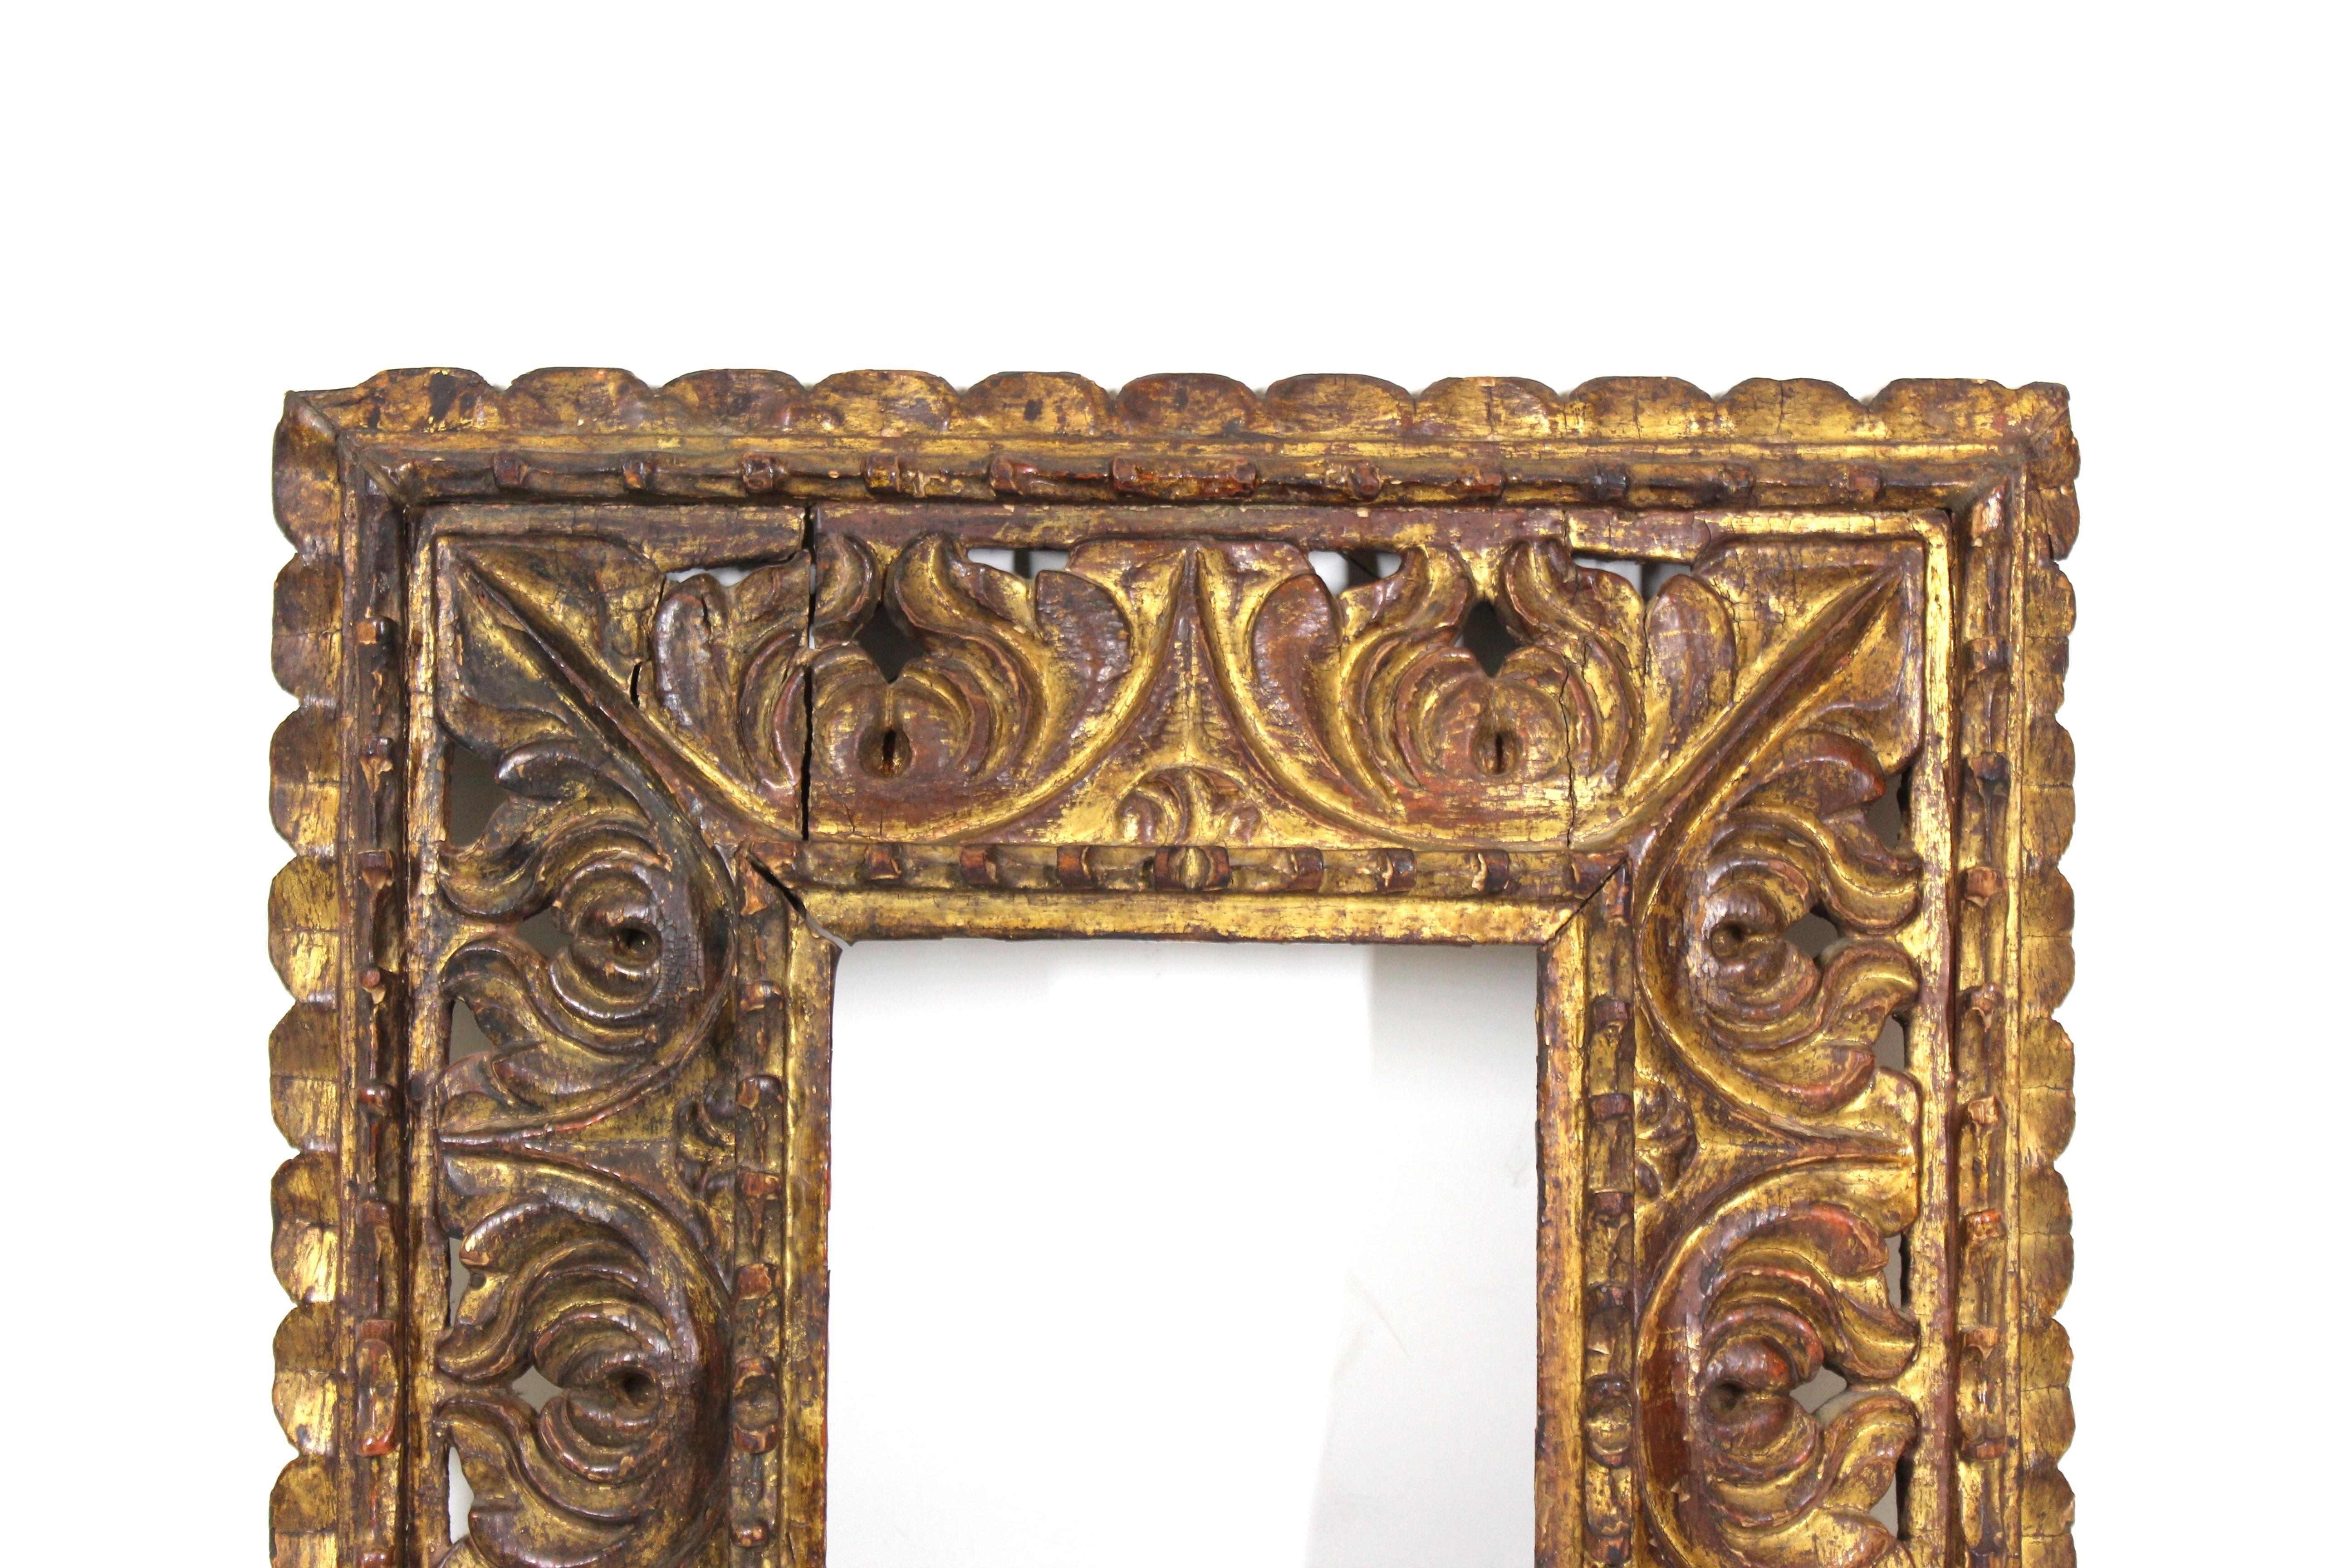 South American Baroque period elaborate giltwood frame with heavy carved openwork. The piece was made in South America during the 18th century and is in remarkable antique condition with age-appropriate wear and use.